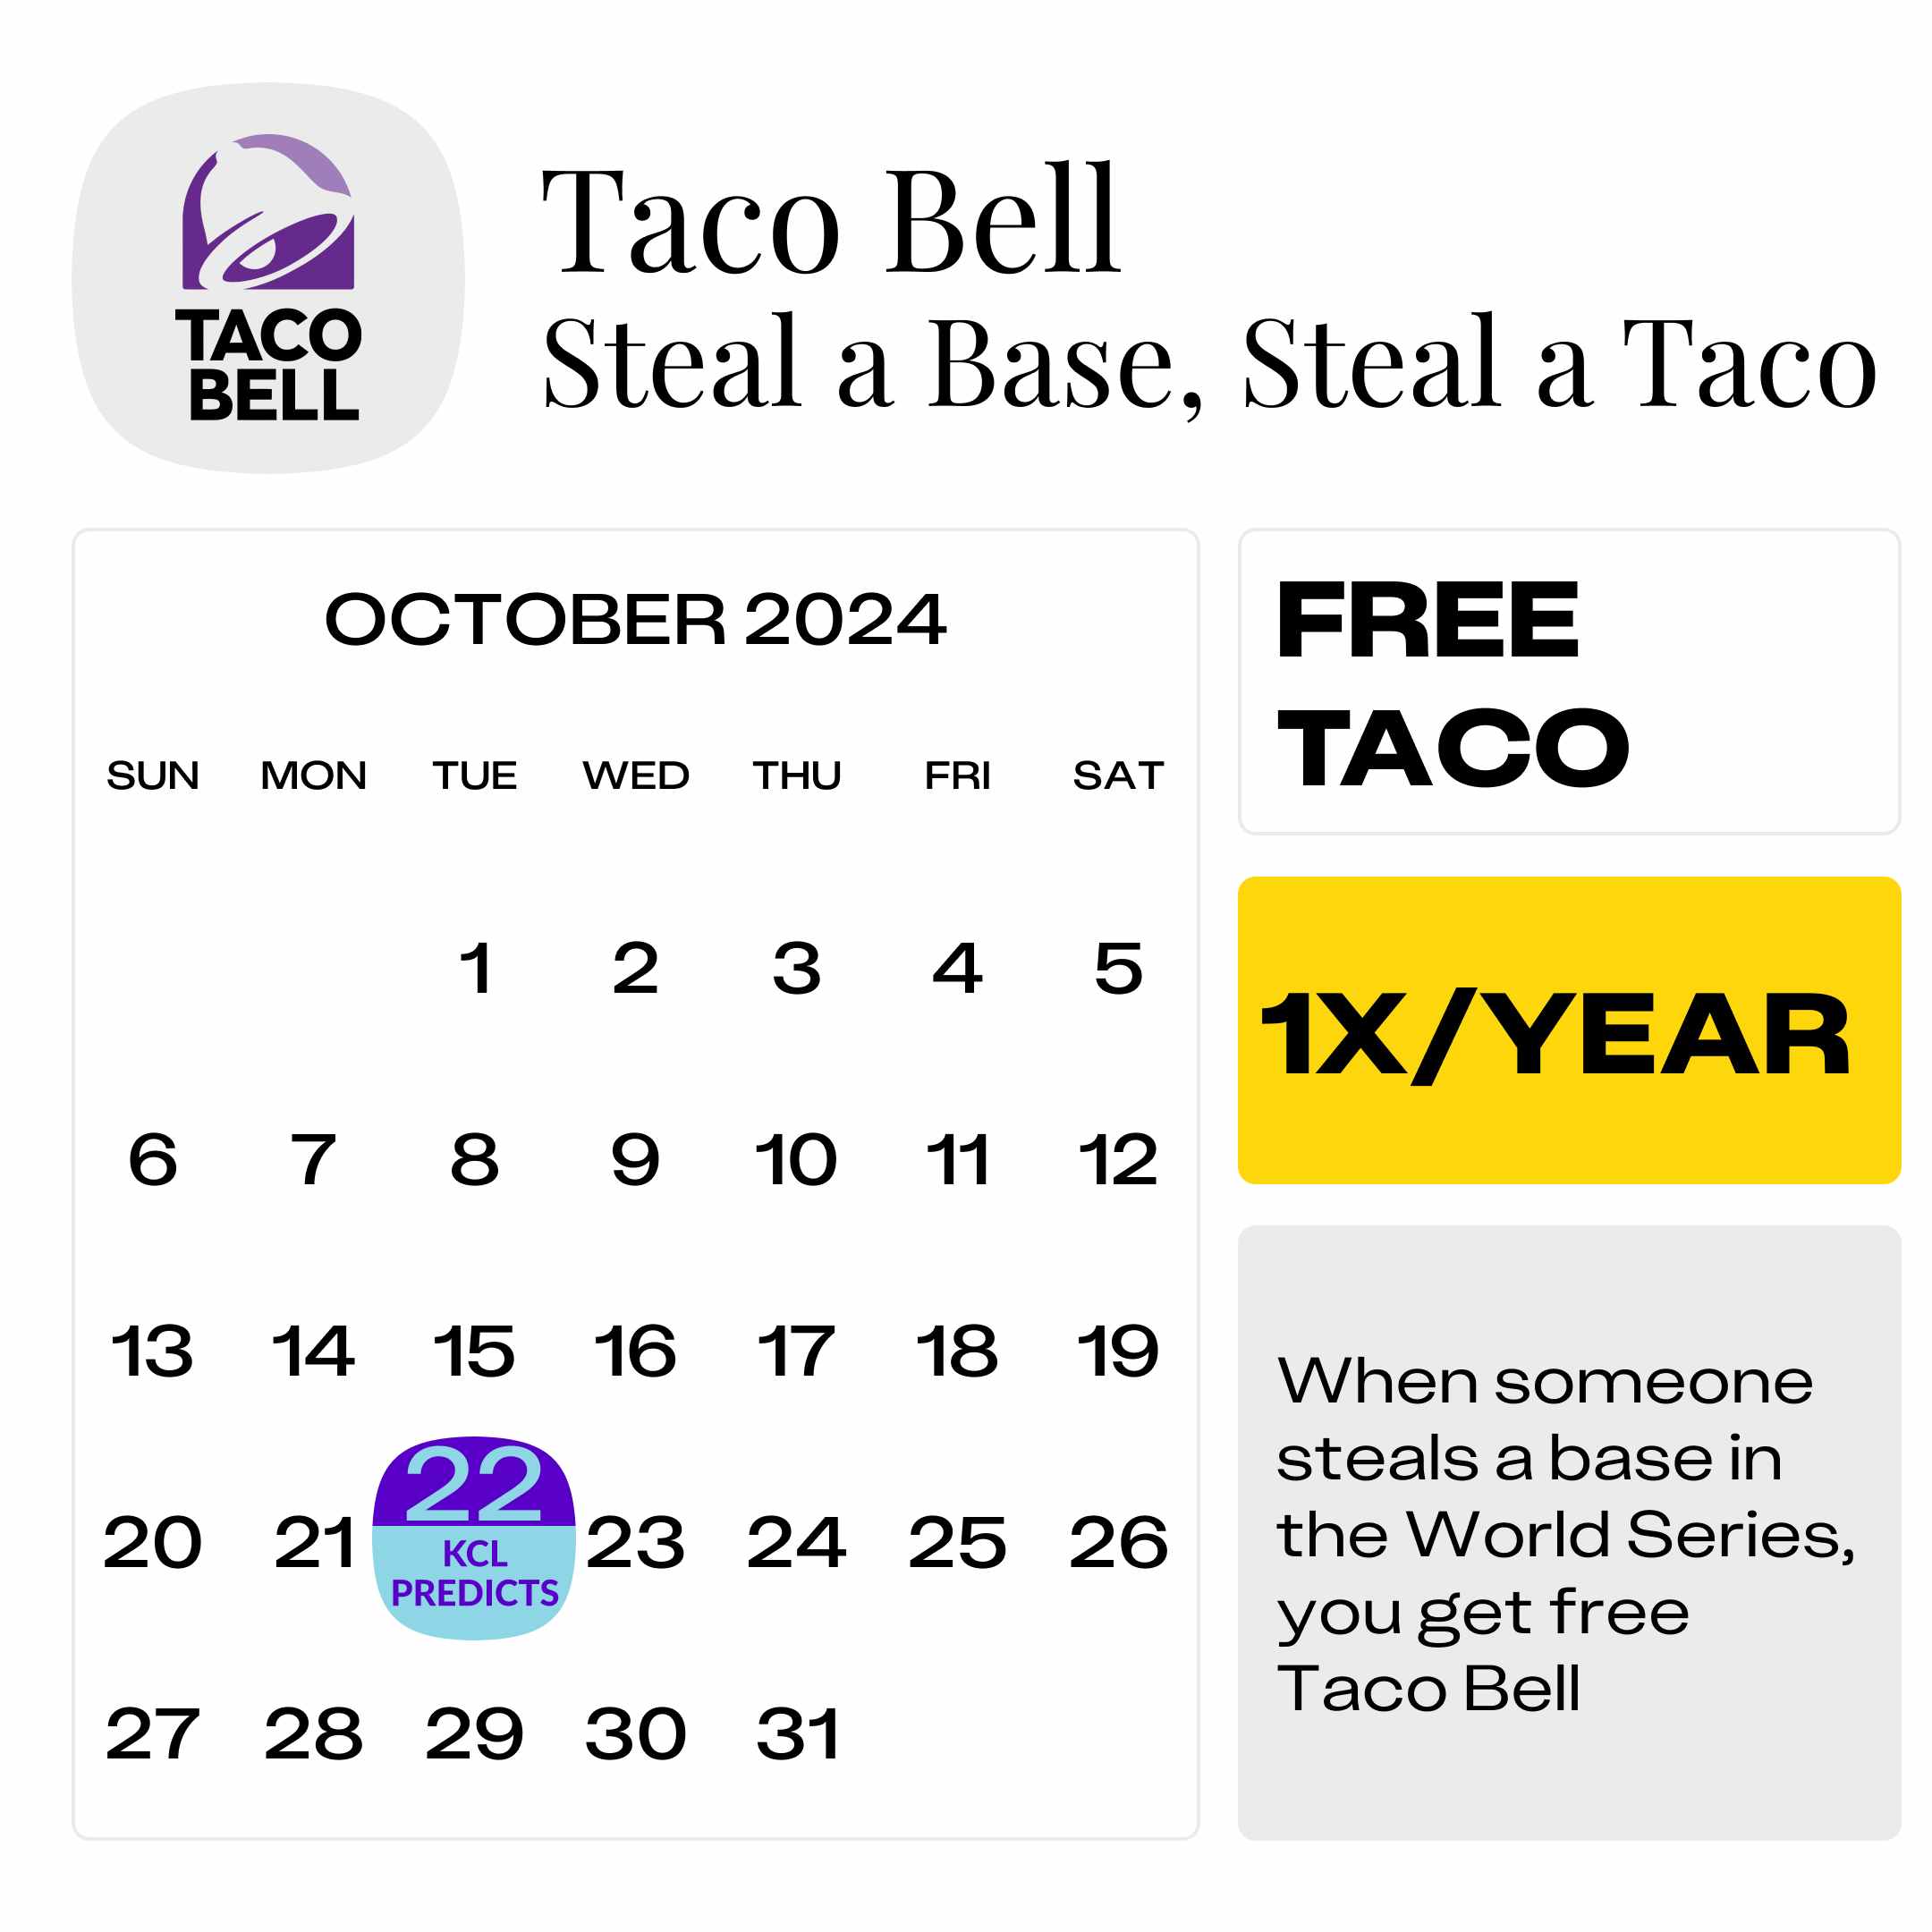 Taco-Bell-Steal-a-Base-Steal-a-Taco